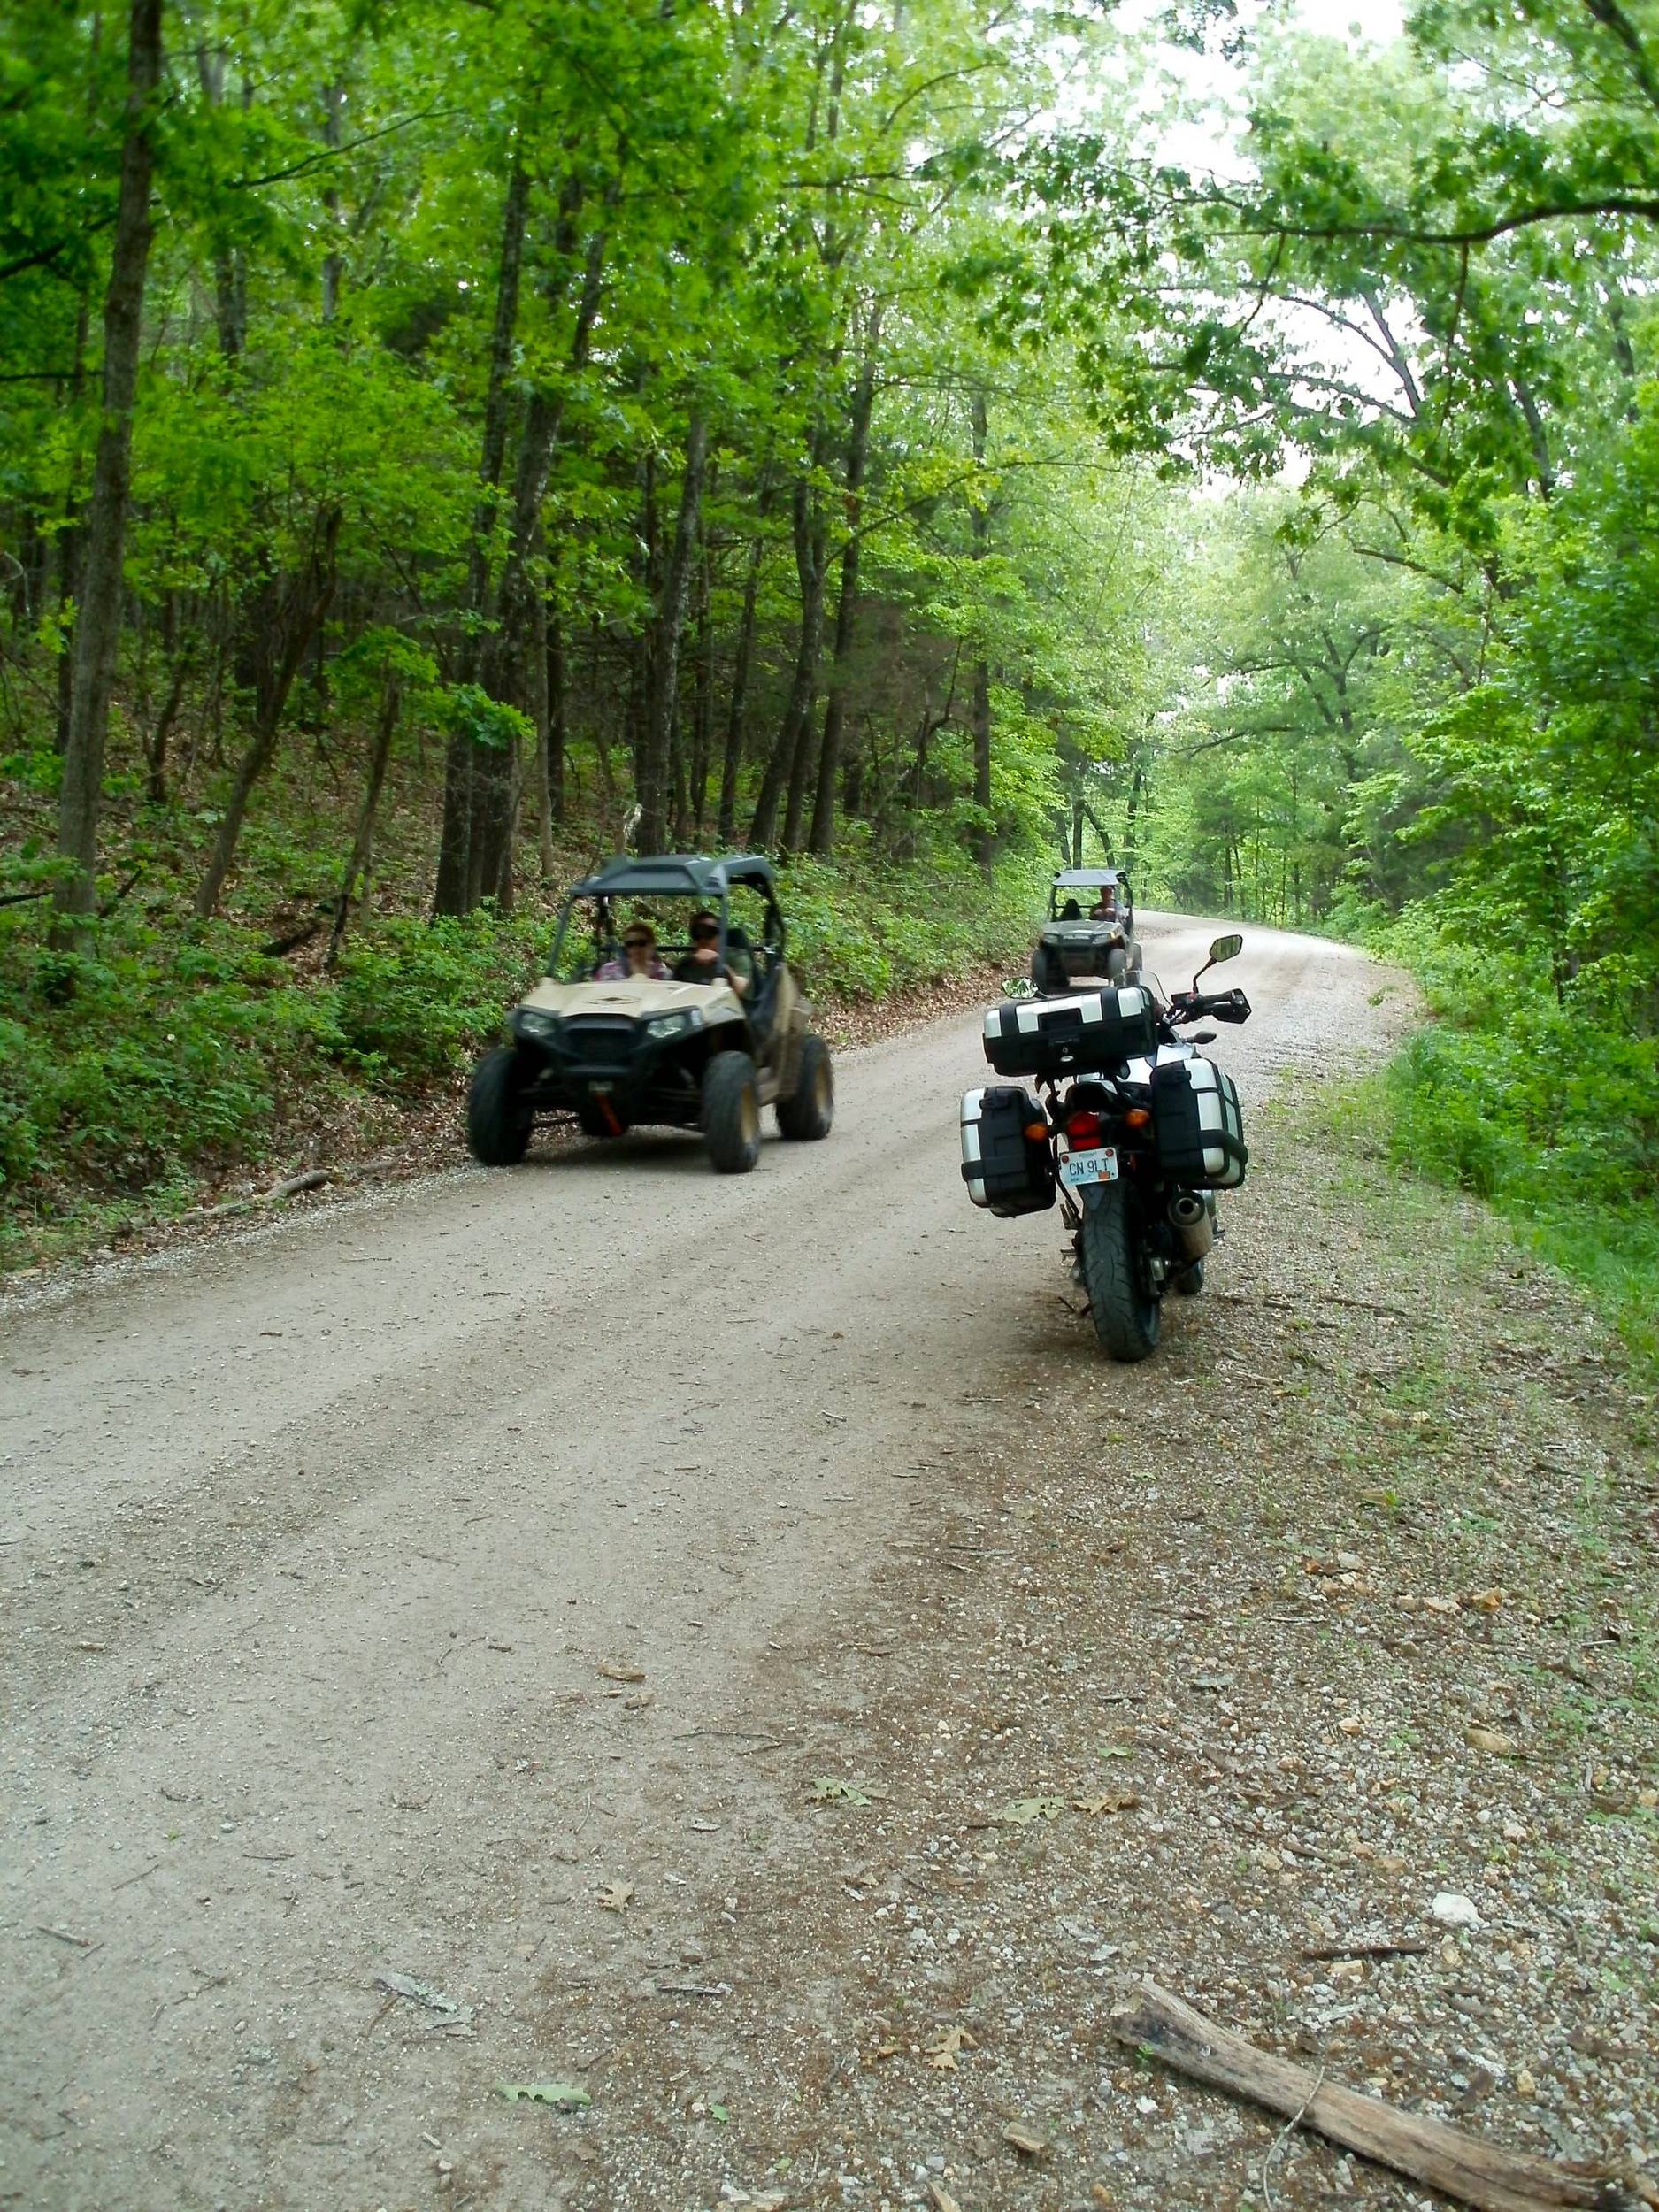 Riding the Glade Top Trail in the Daniel Boone National Forest